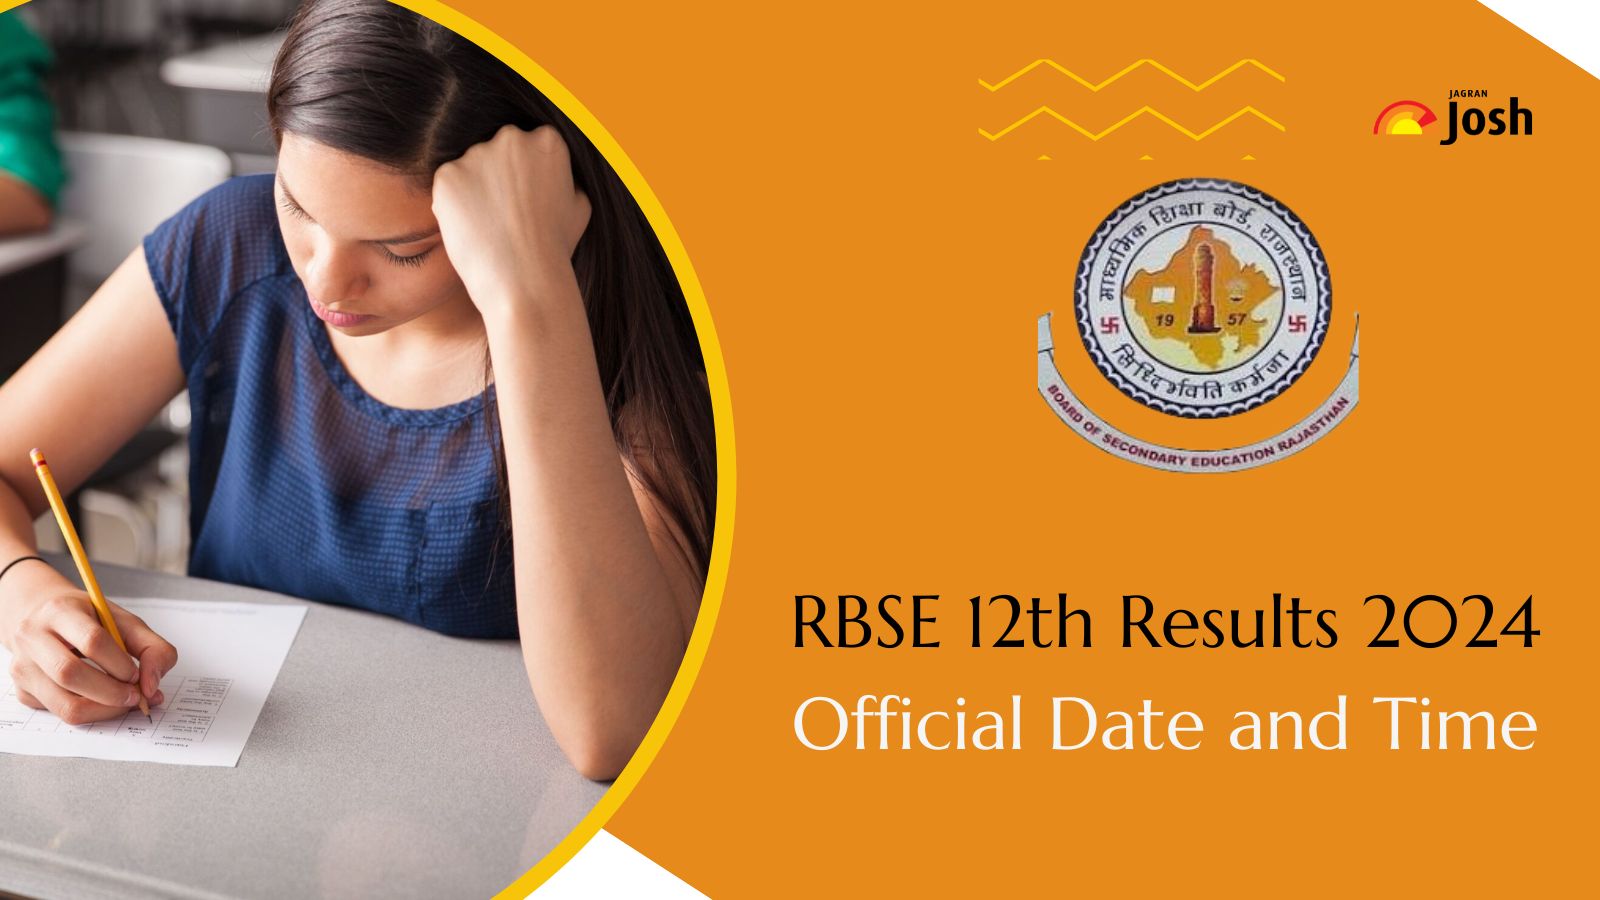 [Official] Rajasthan Board 12th Result 2024 Date and Time Announced: Check RBSE Class 12 Science, Arts and Commerce Results Notice, Tweet